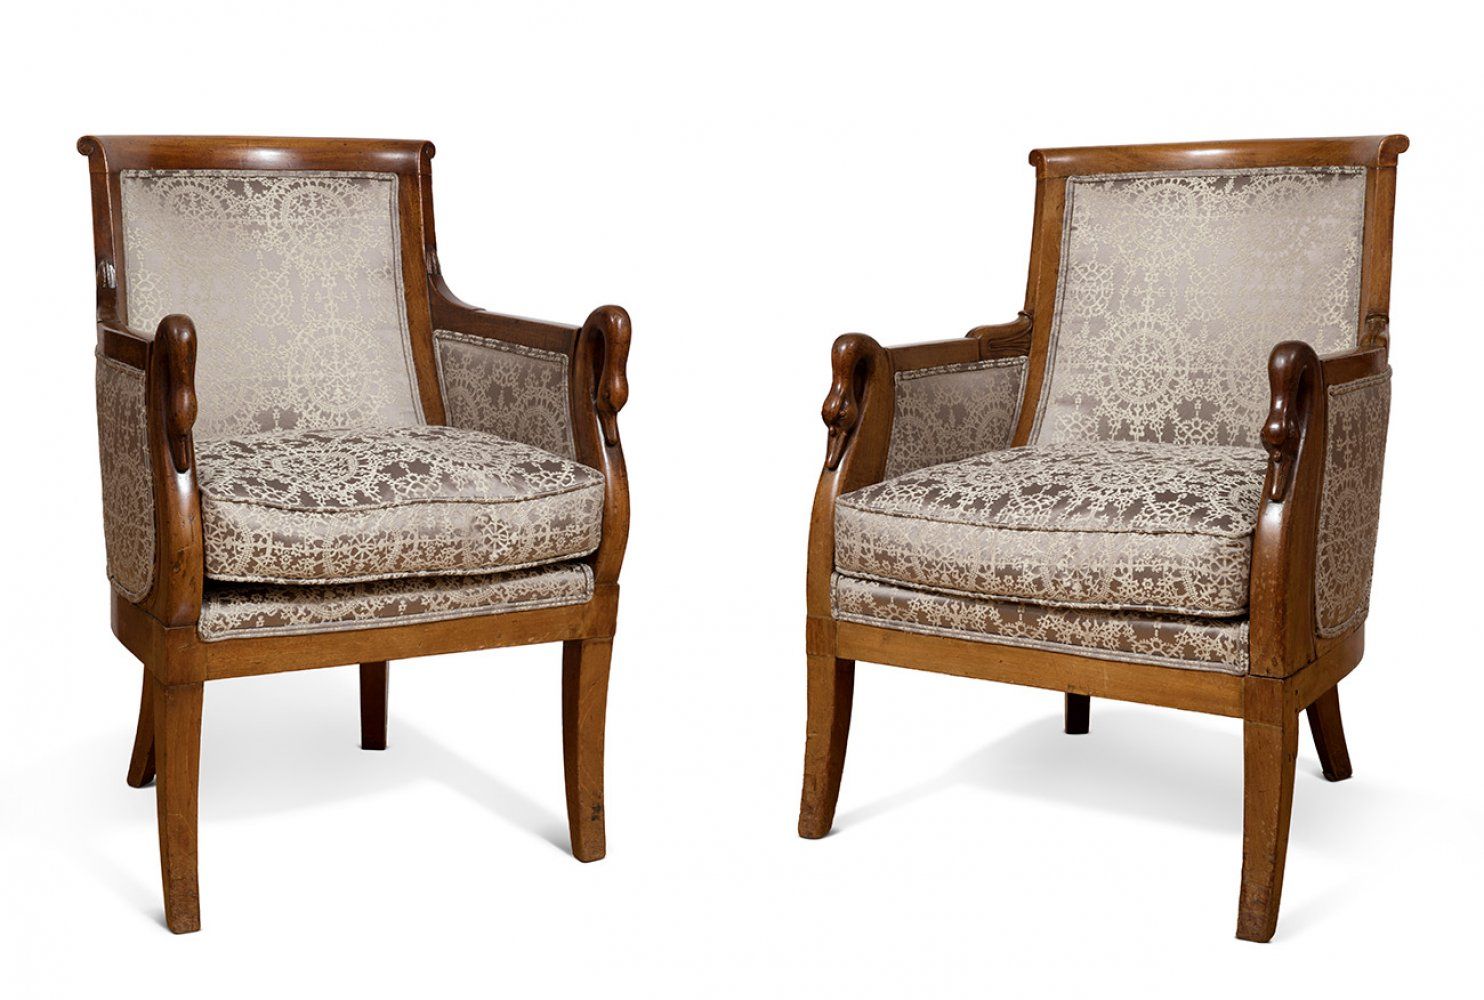 Pair of Bergère armchairs, Restoration Style; France, c 1830. Coppia di poltrone&hellip;